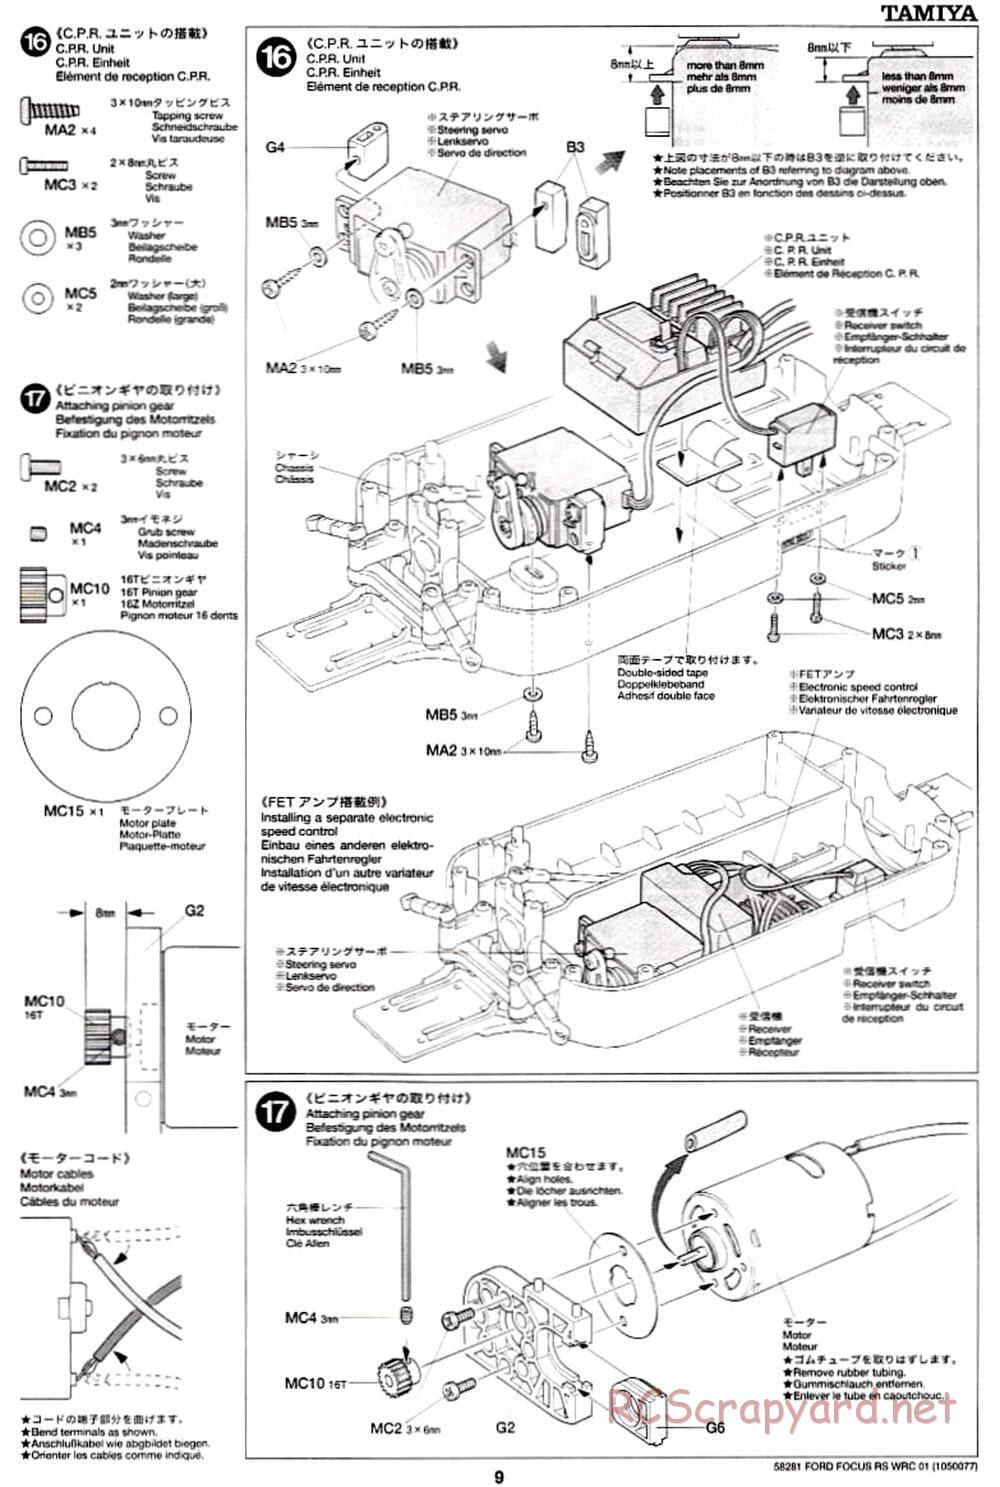 Tamiya - Ford Focus RS WRC 01 - TB-01 Chassis - Manual - Page 9